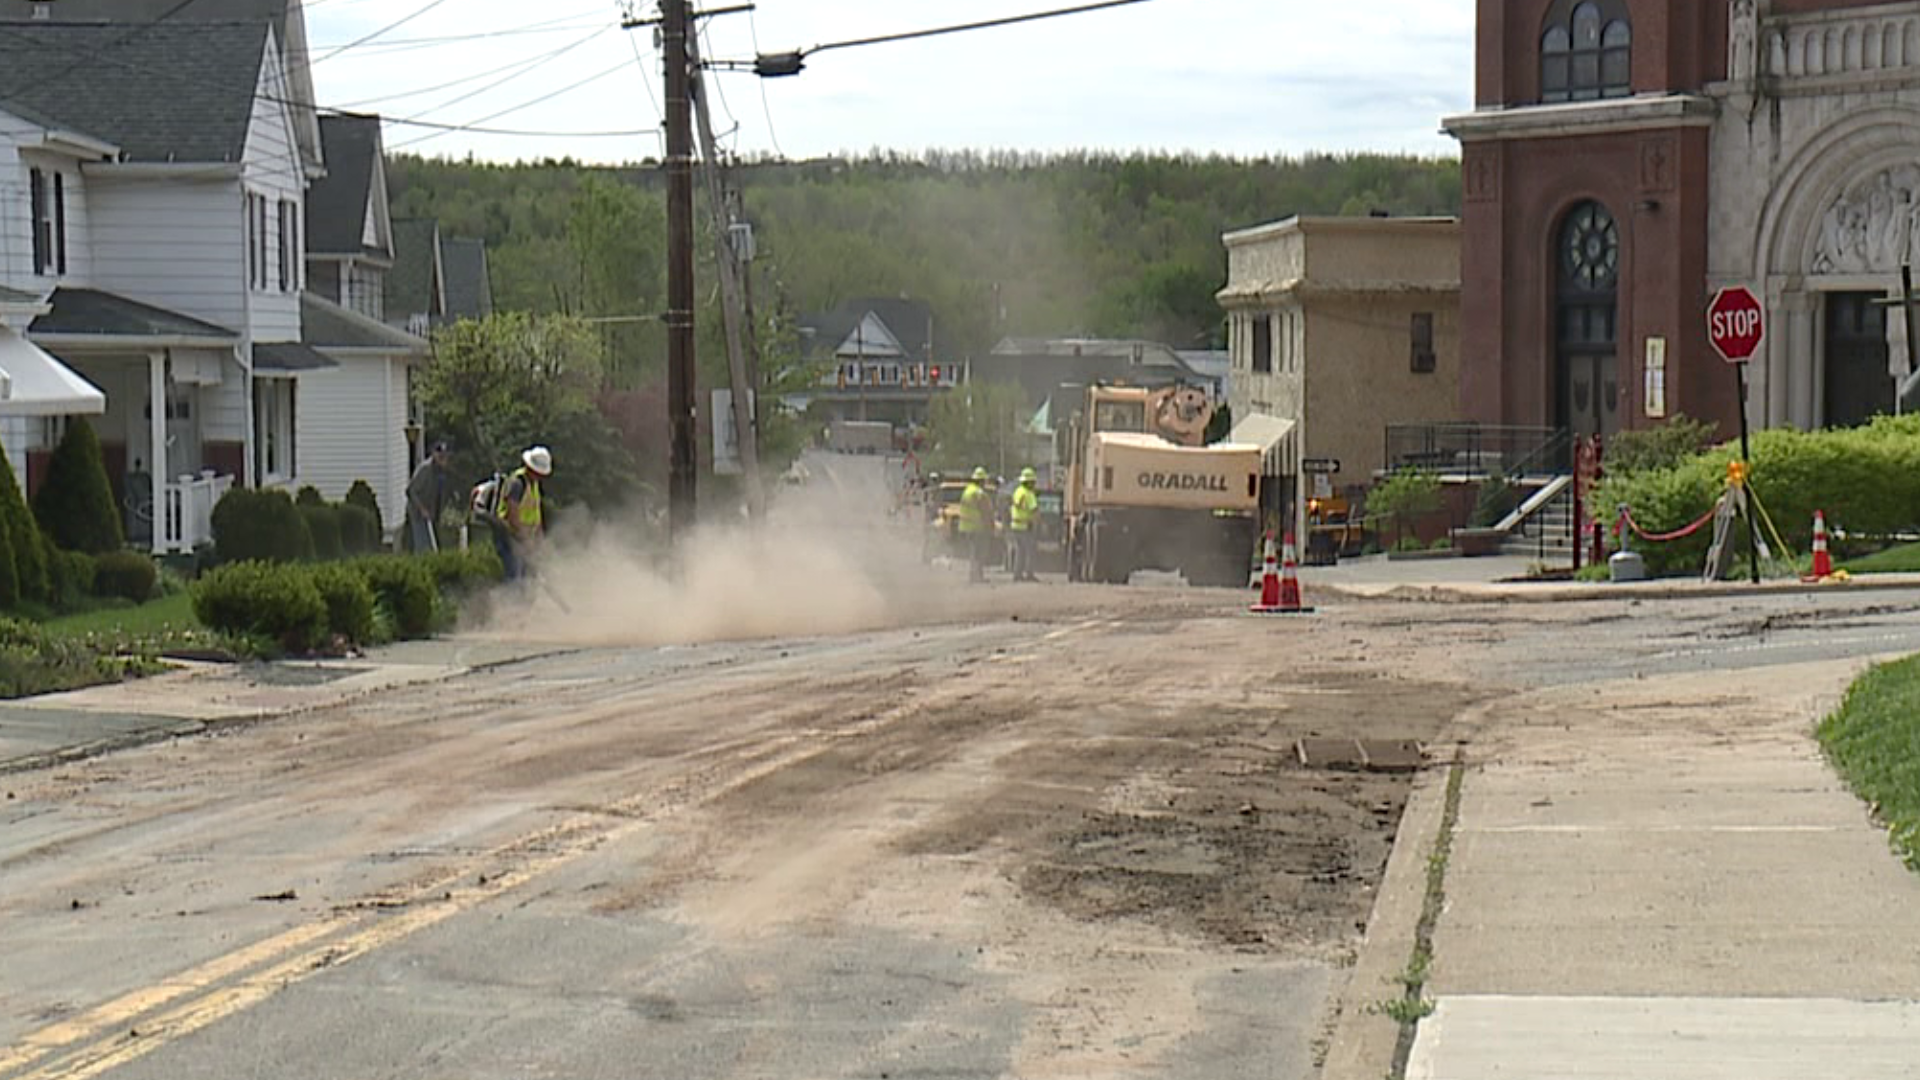 The road was originally expected to reopen Monday, but now there is no expected reopening date.